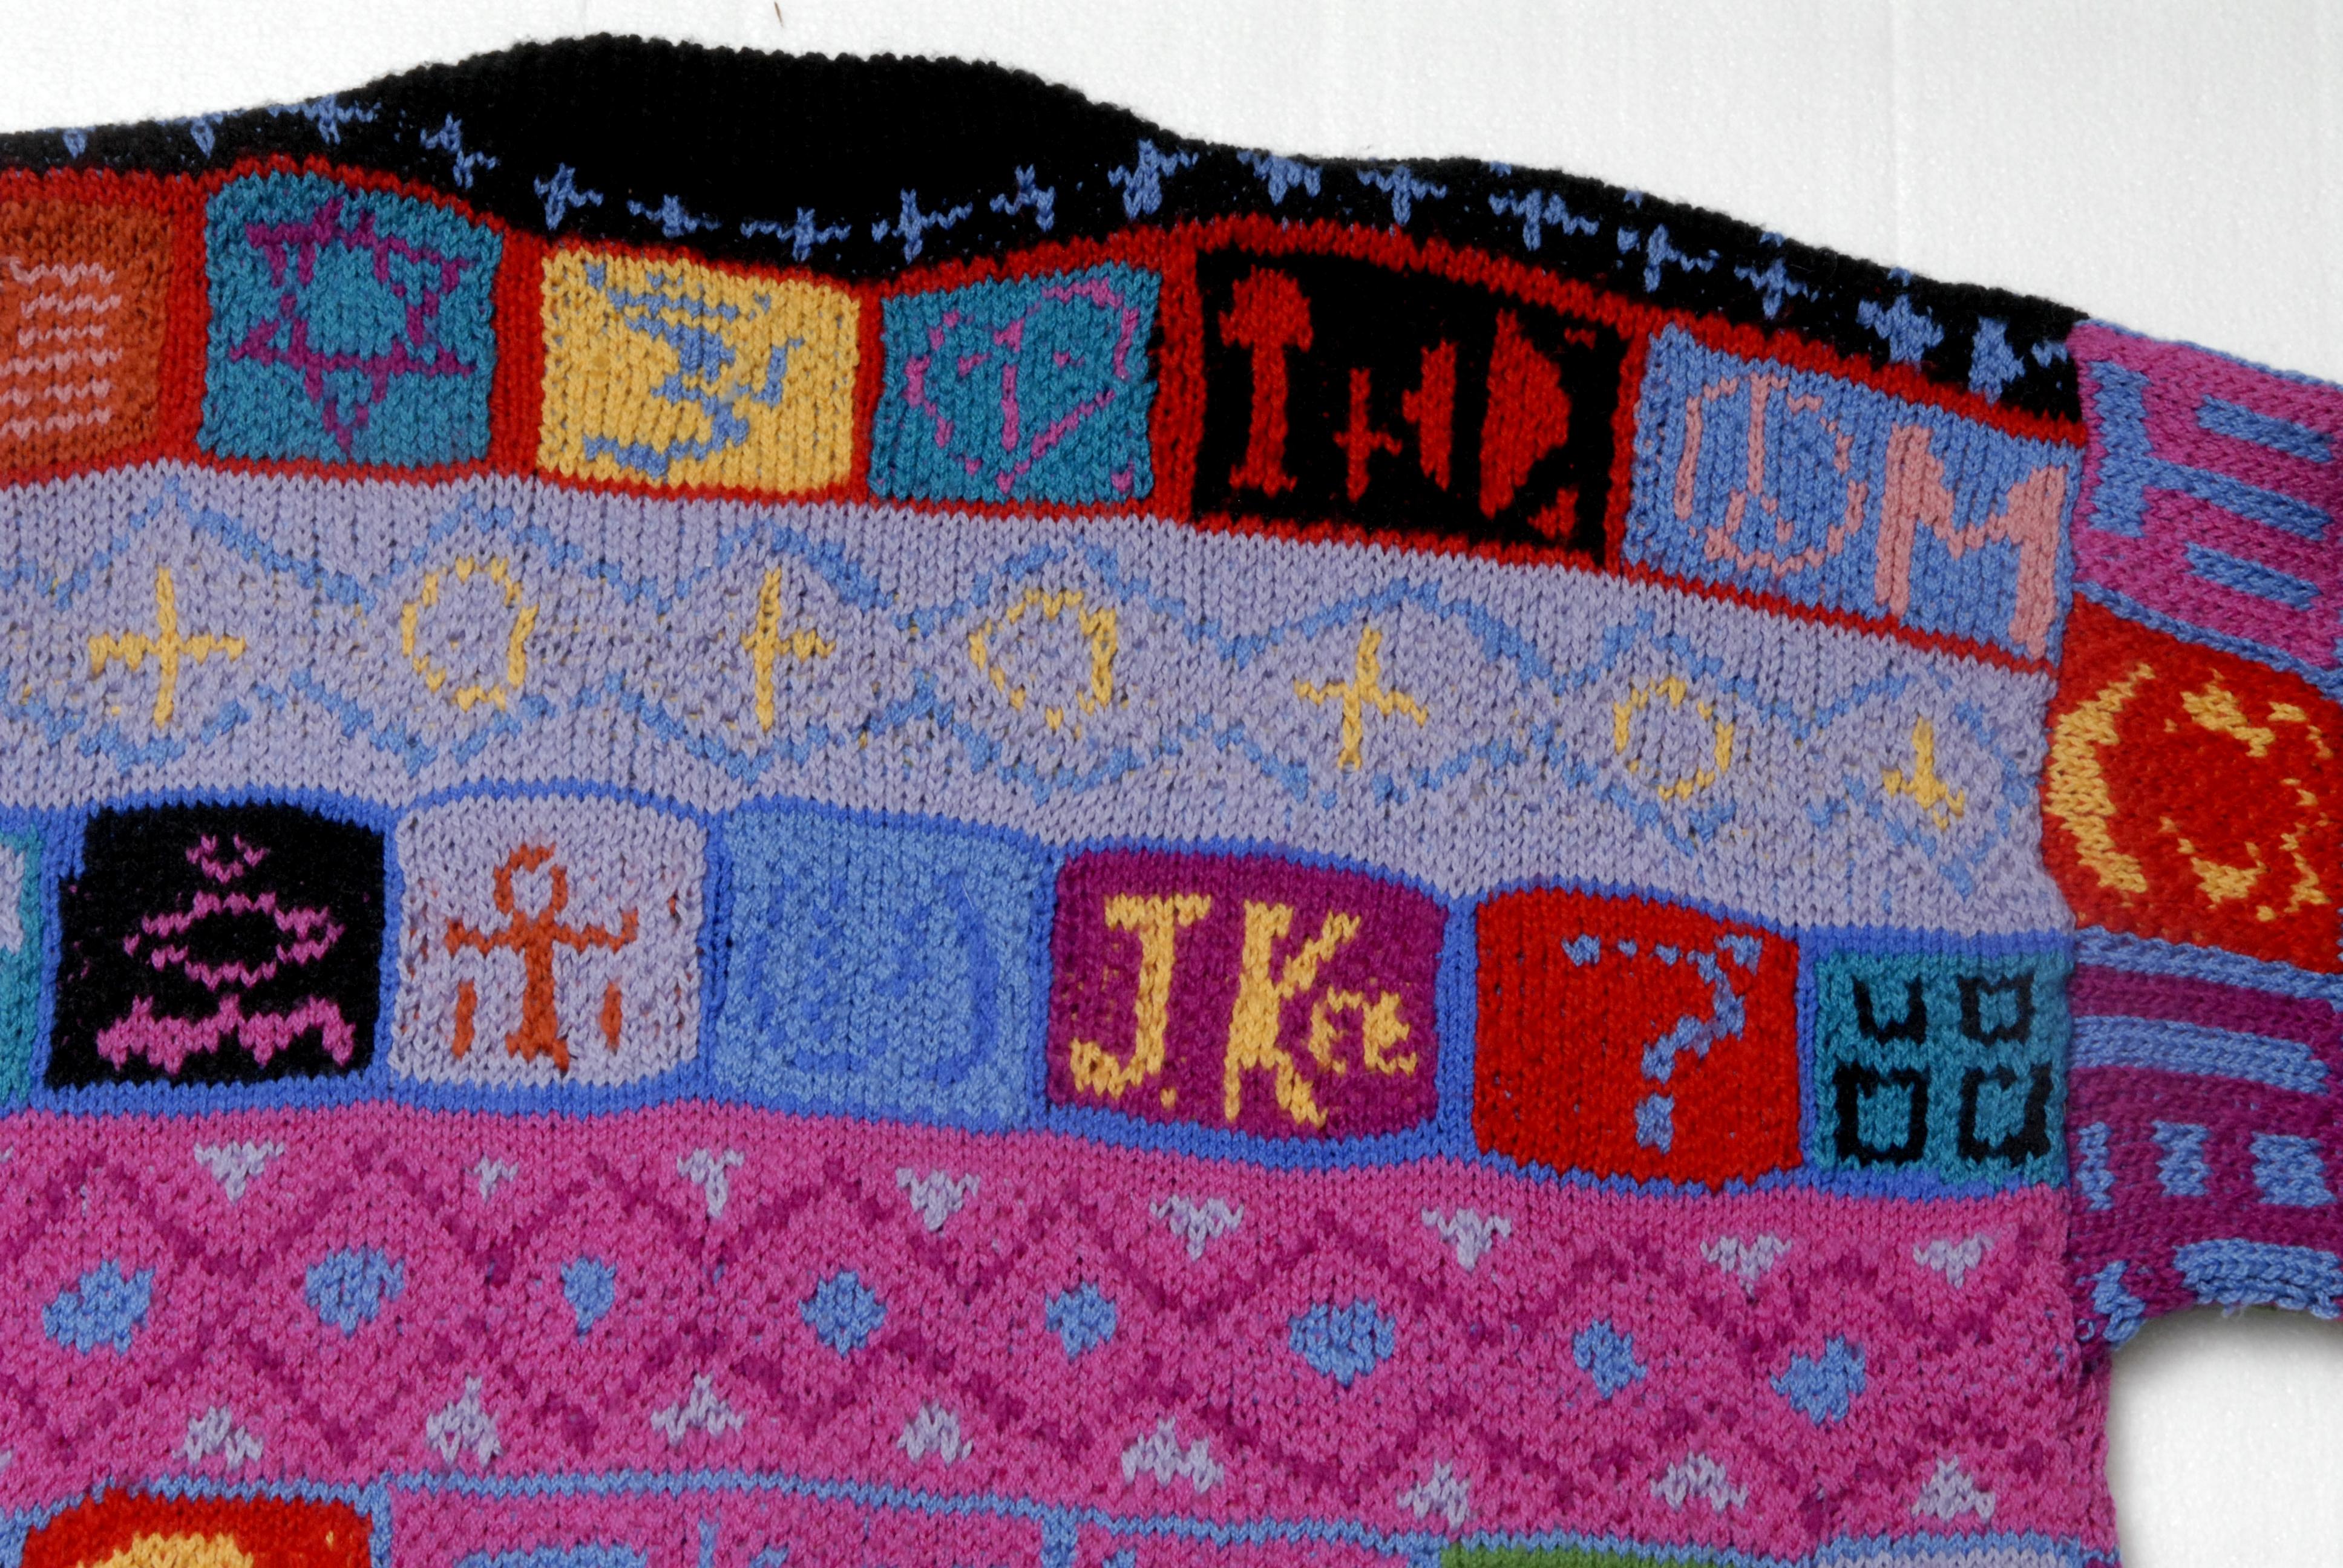 Jenny Kee Hand Knitted Wool Cardigan, Australia, circa 1980 In Excellent Condition For Sale In Pymble, NSW